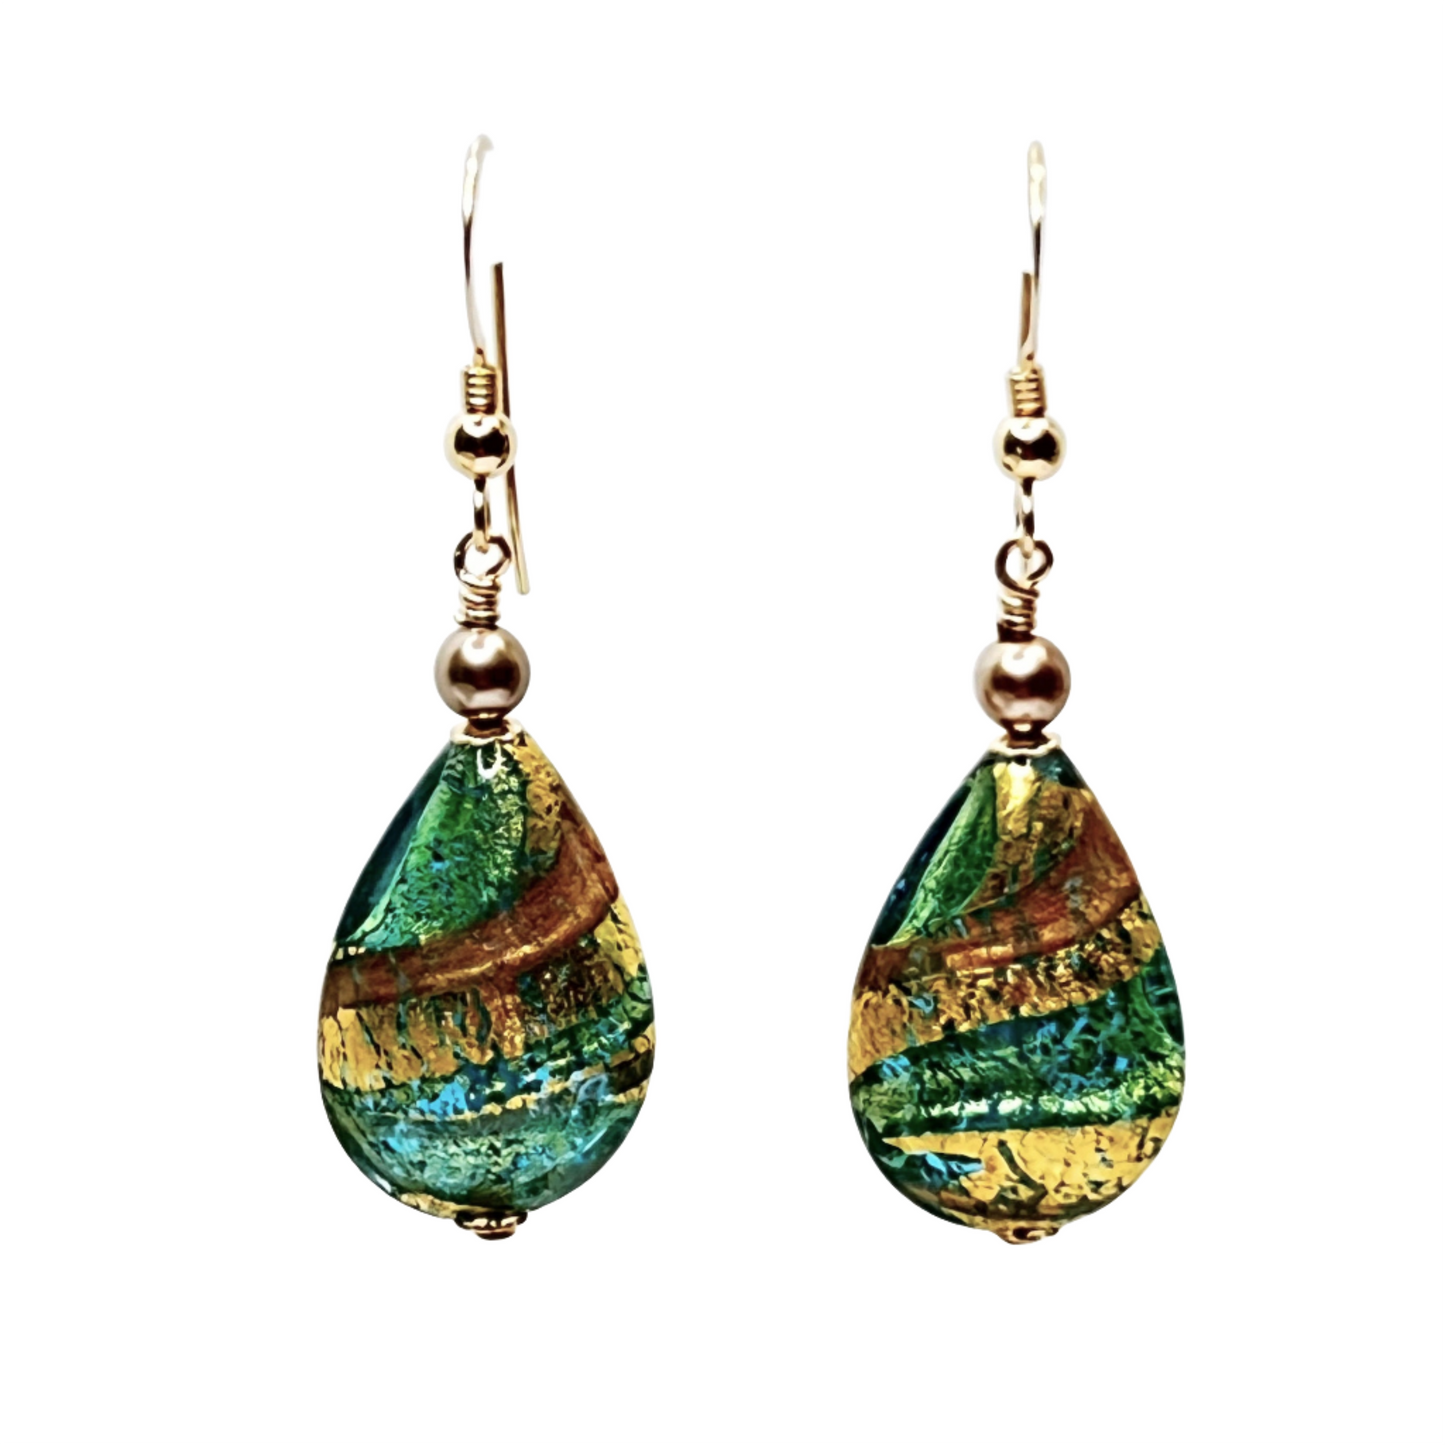 a pair of earrings with green and yellow designs